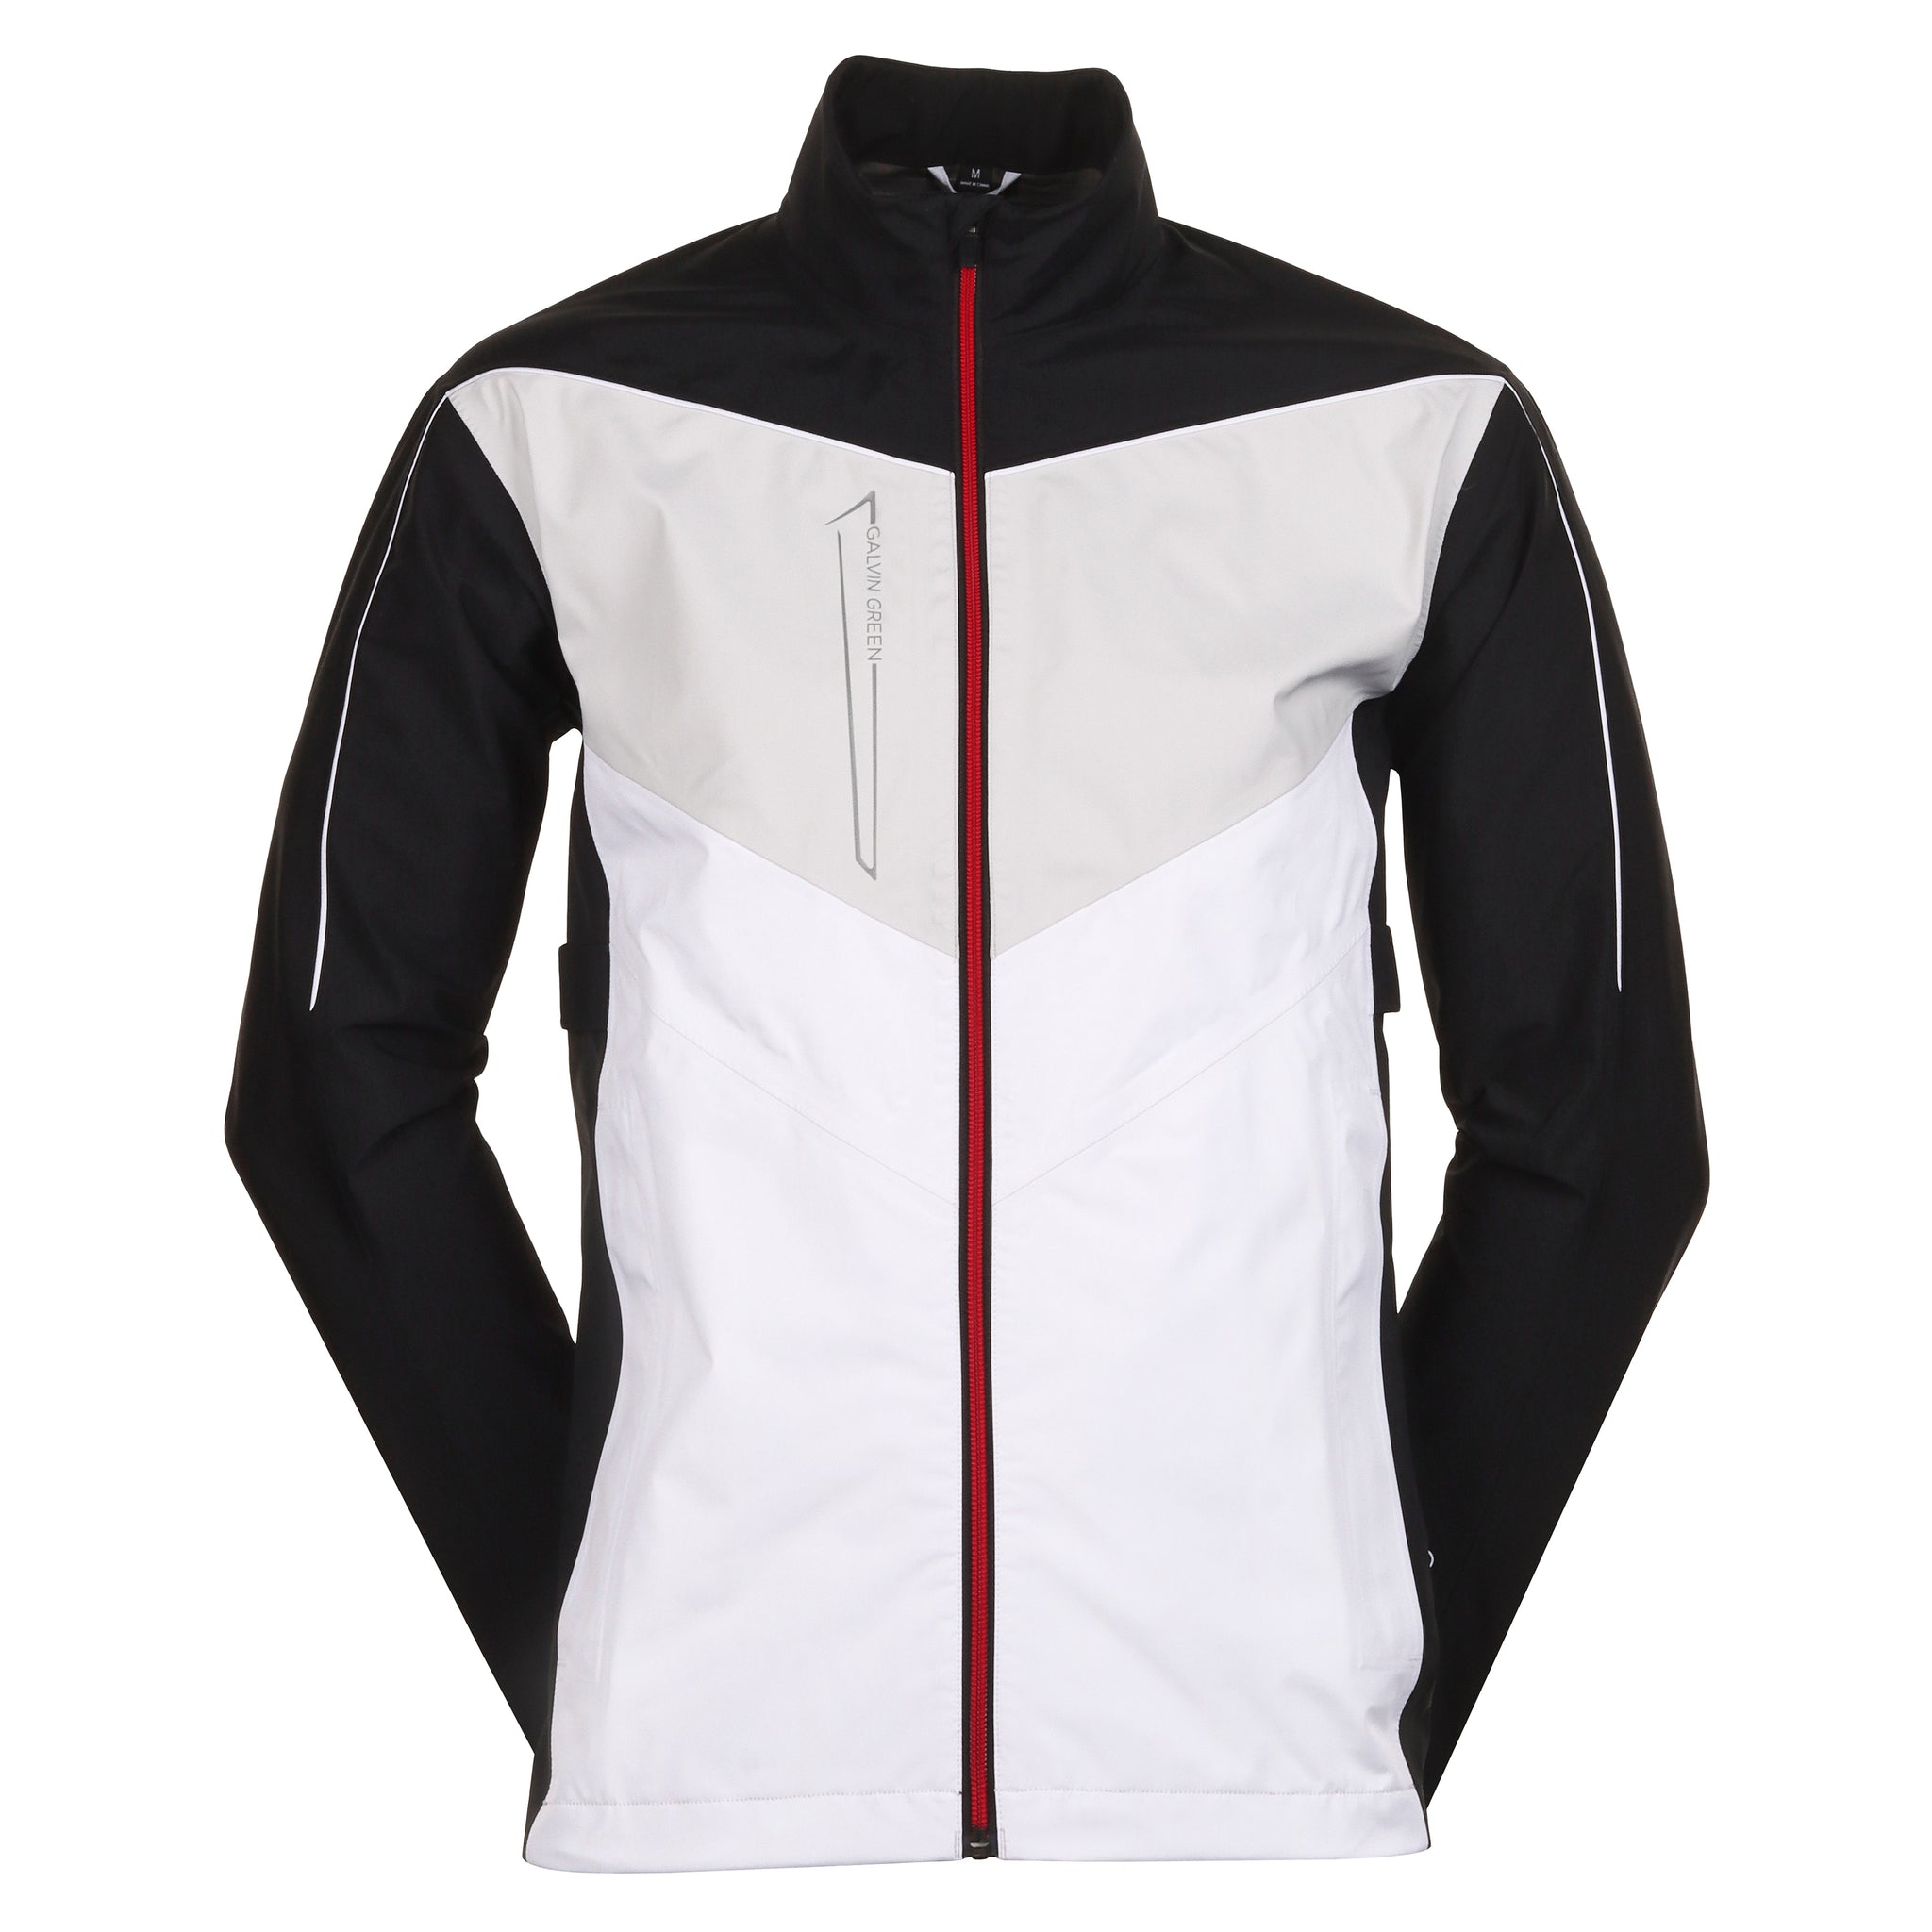 galvin-green-armstrong-paclite-gore-tex-waterproof-golf-jacket-black-white-red-9377